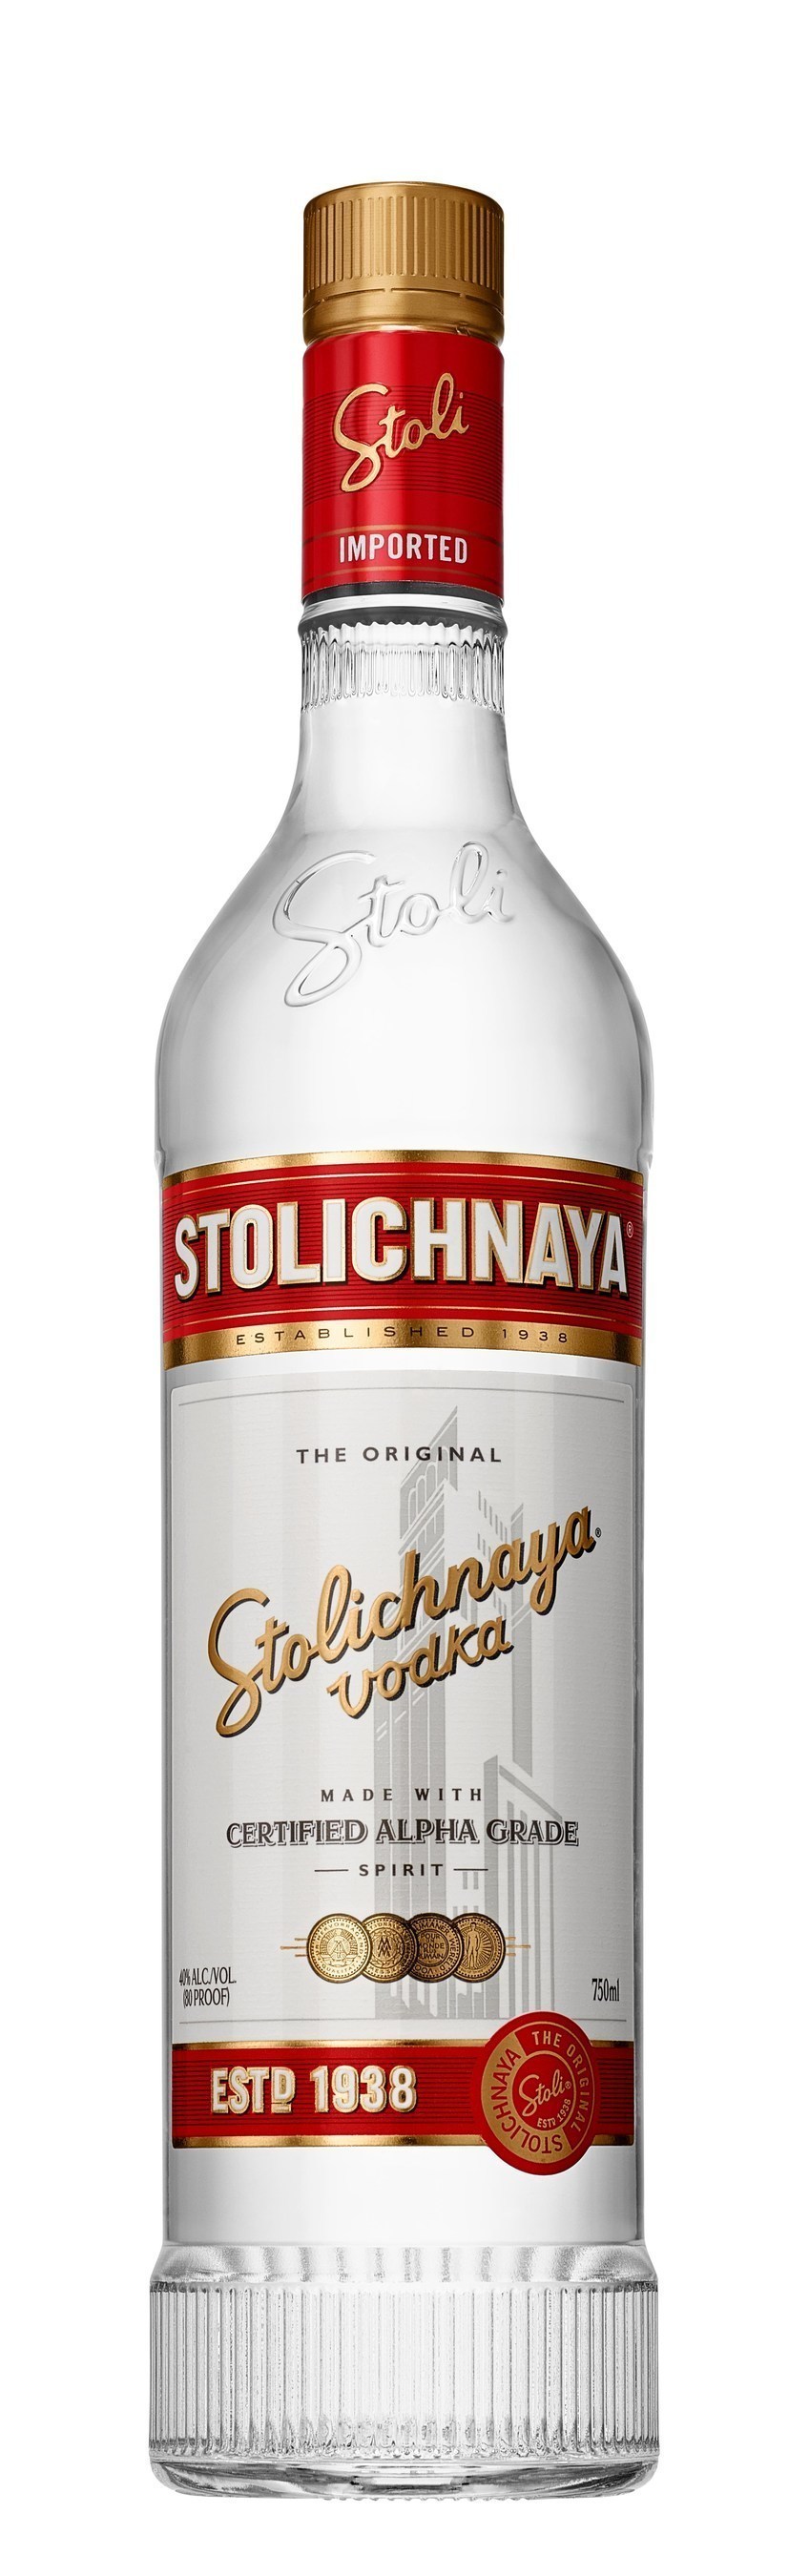 Stoli(R) Vodka Unveils First Complete Packaging Re-Design In More Than Eighty Years